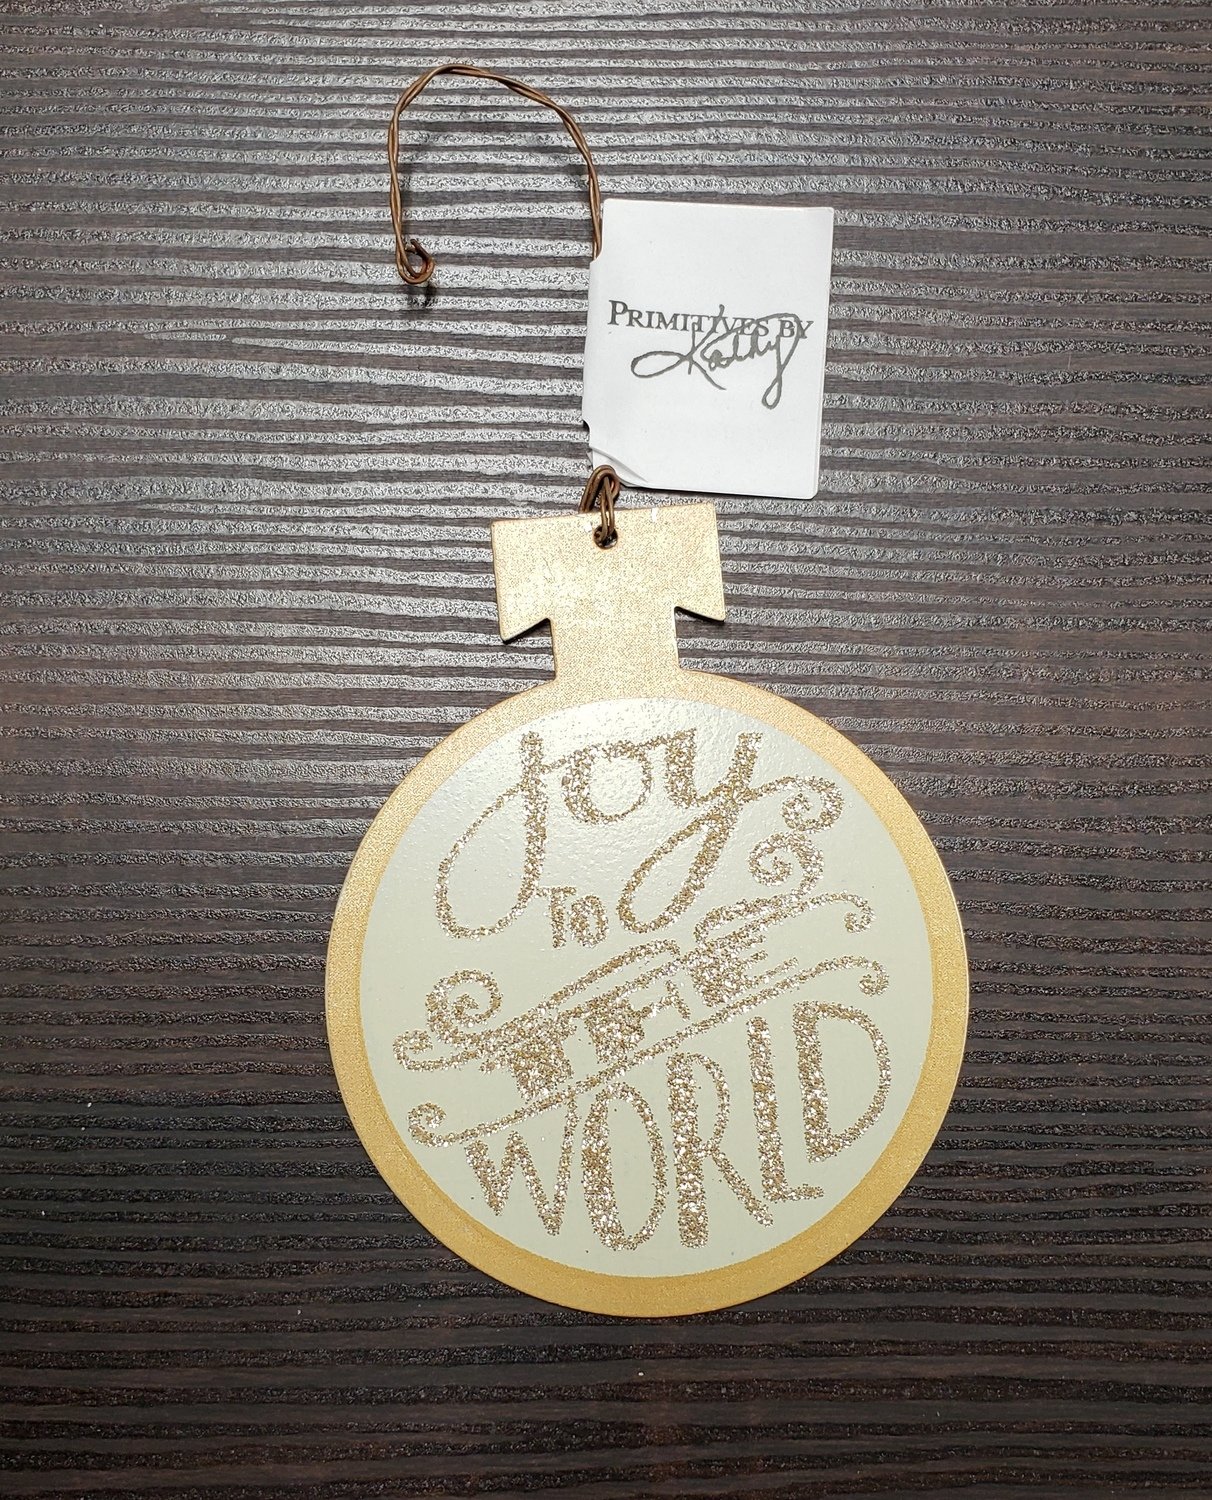 Joy to the World - Primitives by Kathy Ornament